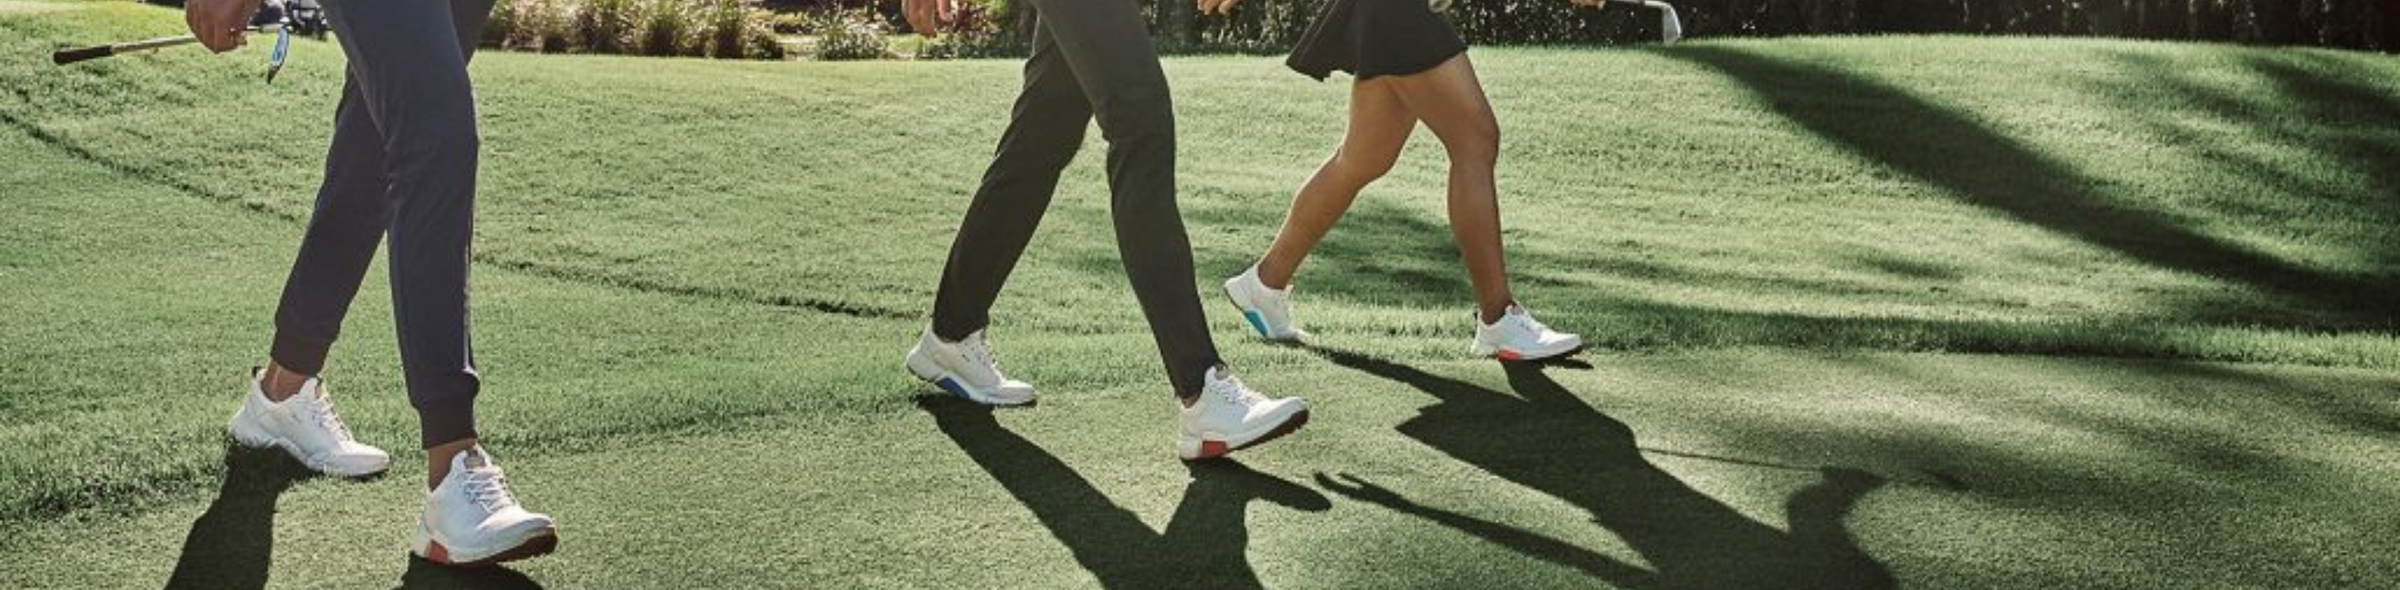 Golfers wearing ECCO golf shoes on the course